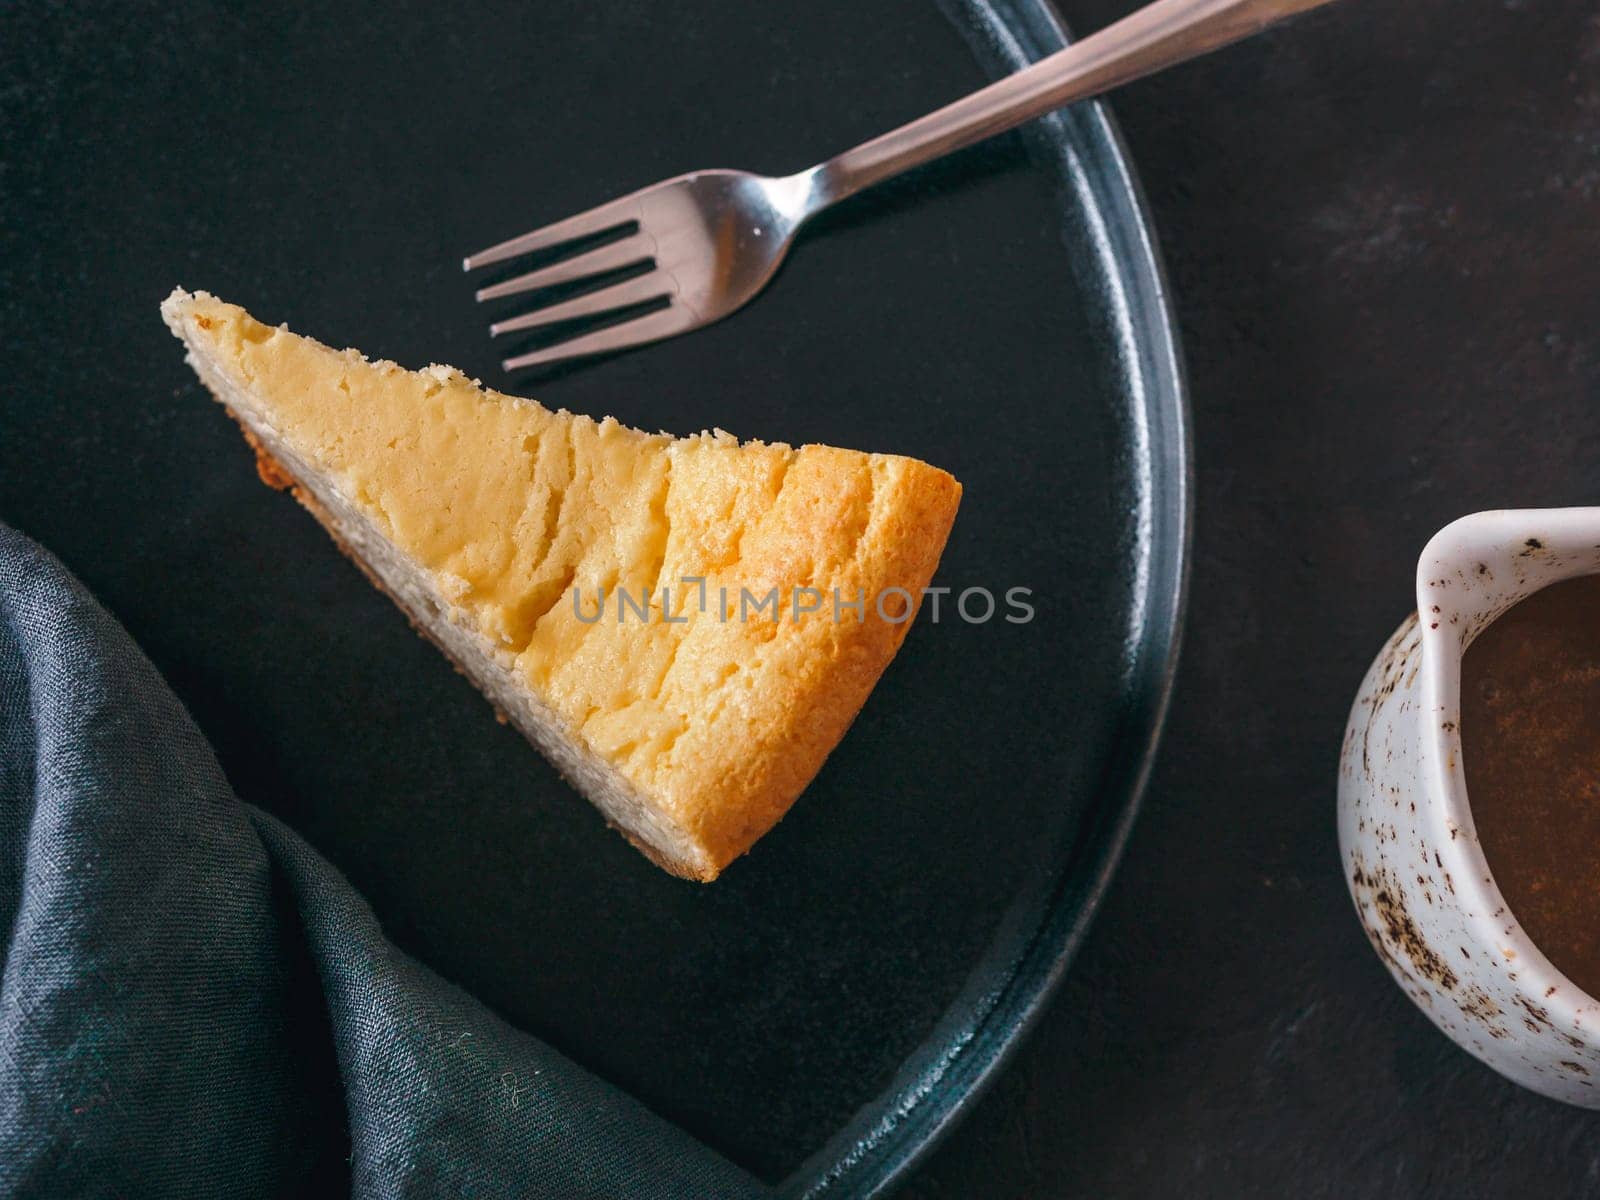 Classic Cheesecake on dark background. Top view by fascinadora